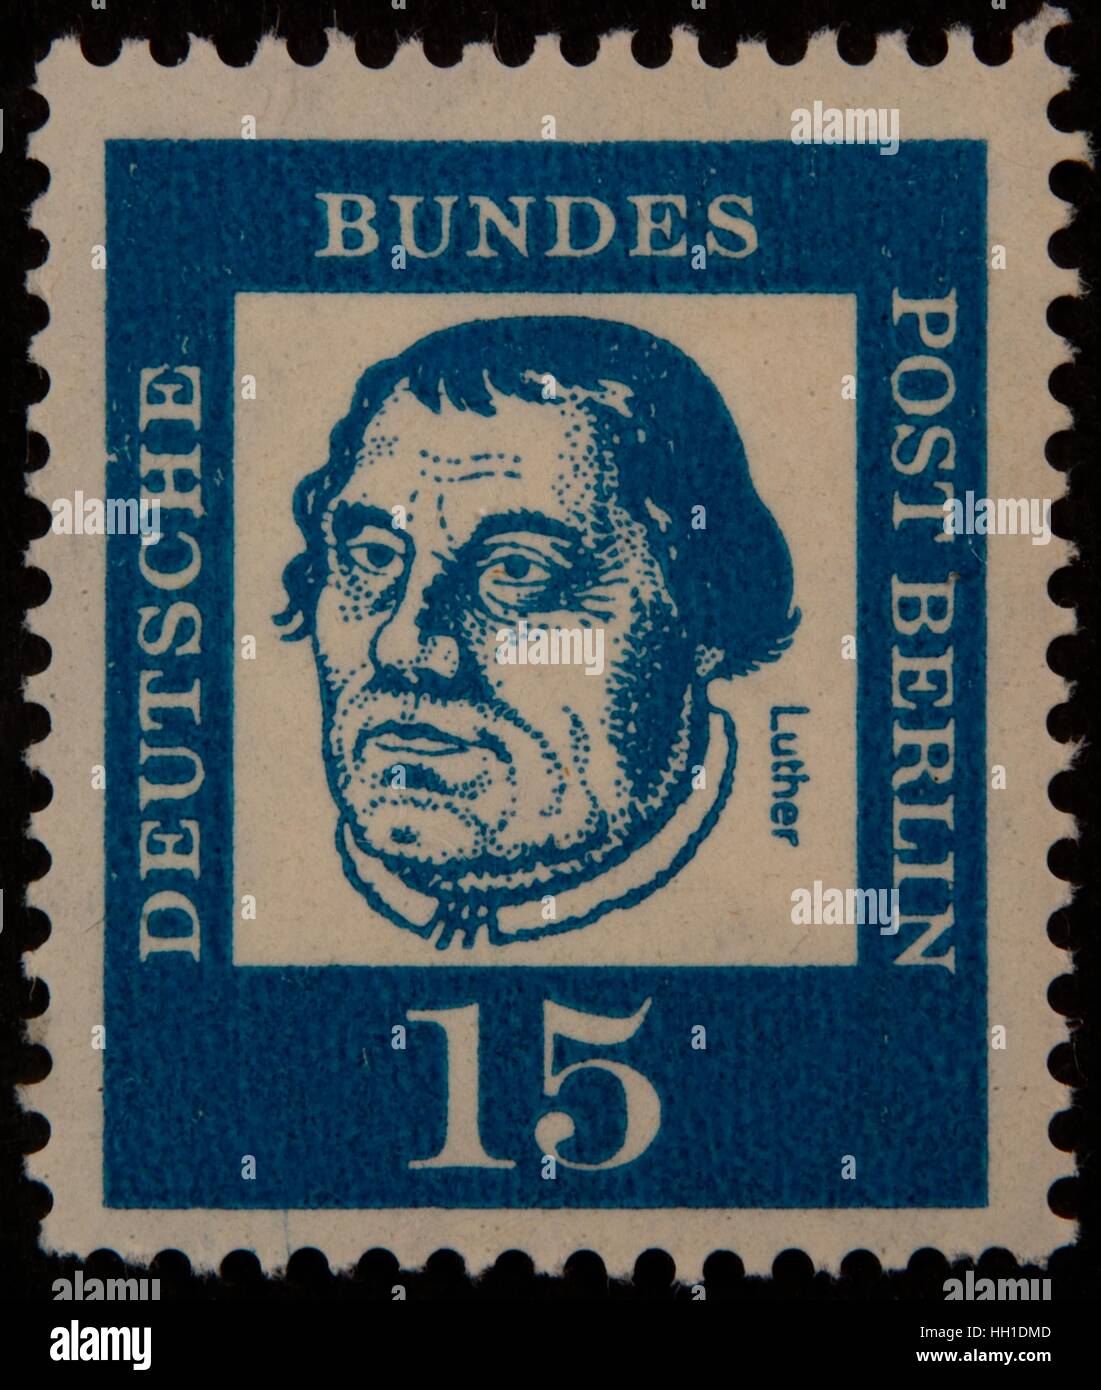 German stamp, FRG, 1961, portrait of Martin Luther, professor of theology, priest, seminal figure in the Protestant Reformation Stock Photo